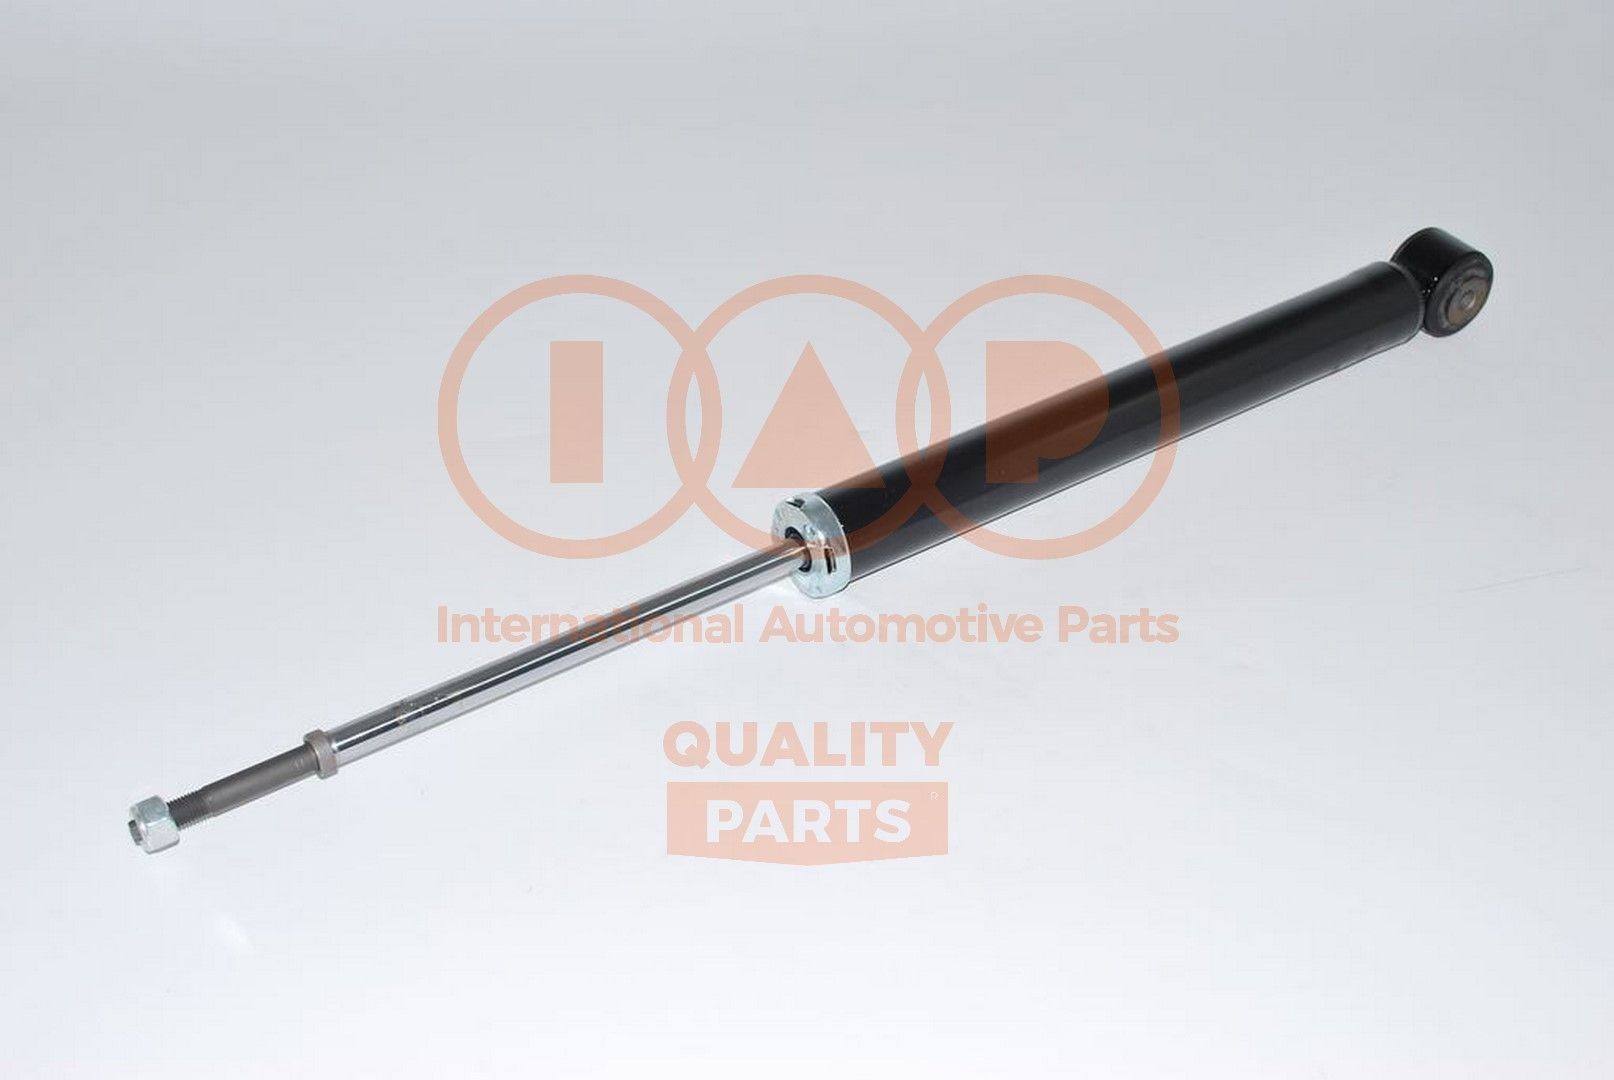 IAP QUALITY PARTS 504-17182 Shock absorber 485300D310